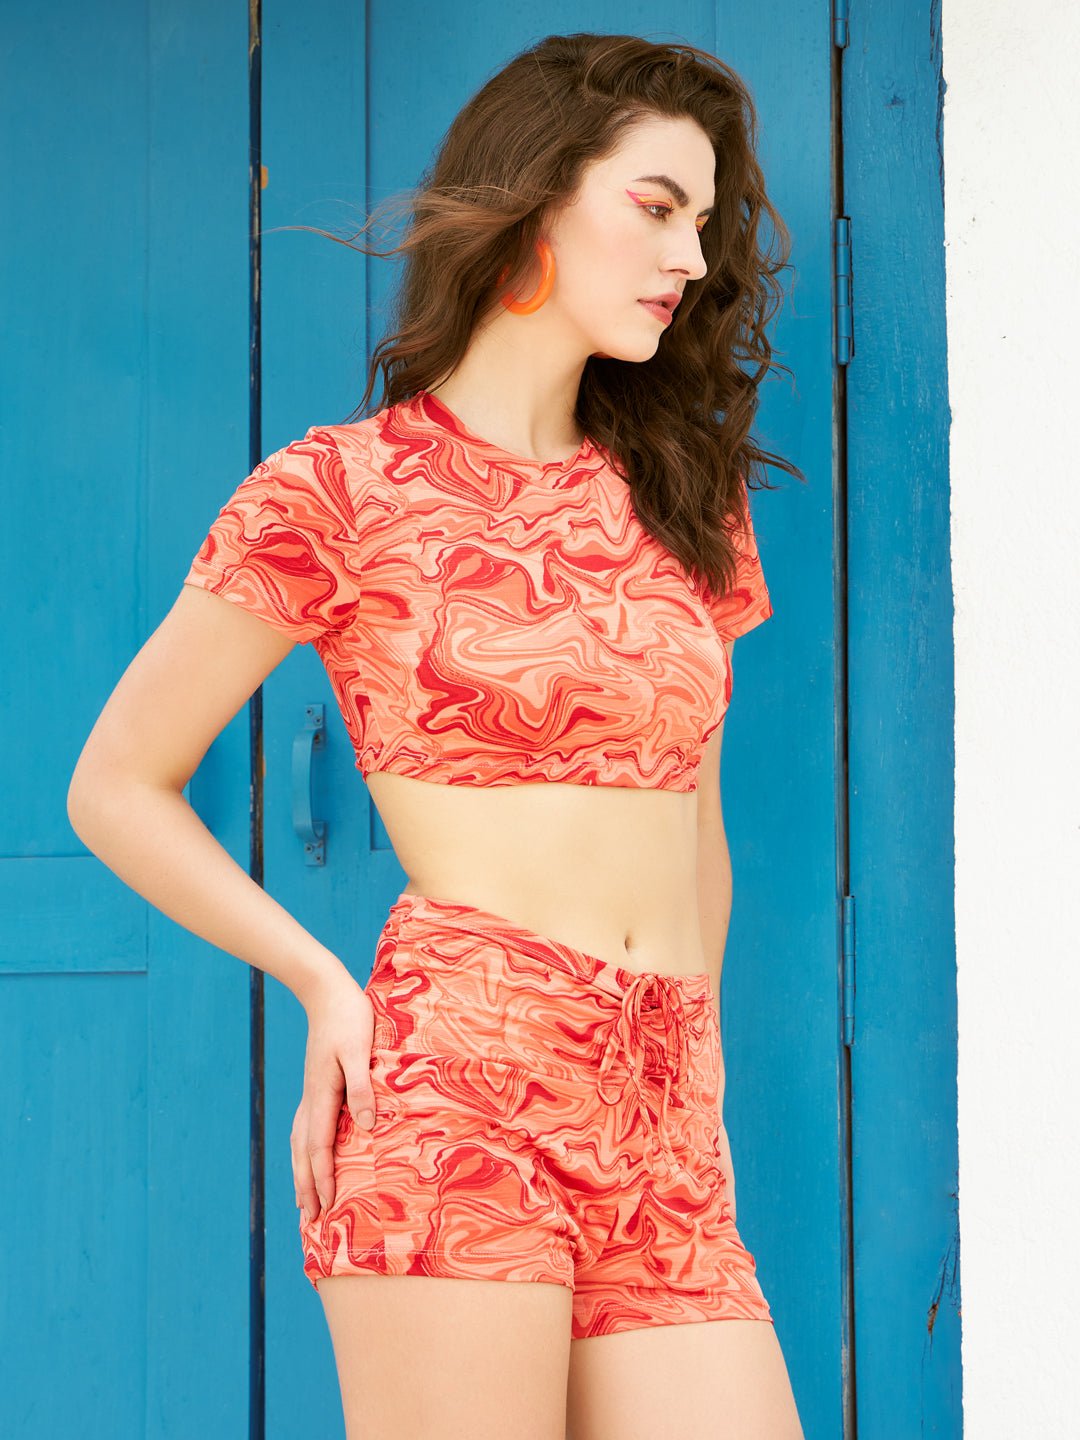 Stacked Flame Vibrant Red Swirl Print Crop Top and Shorts Set